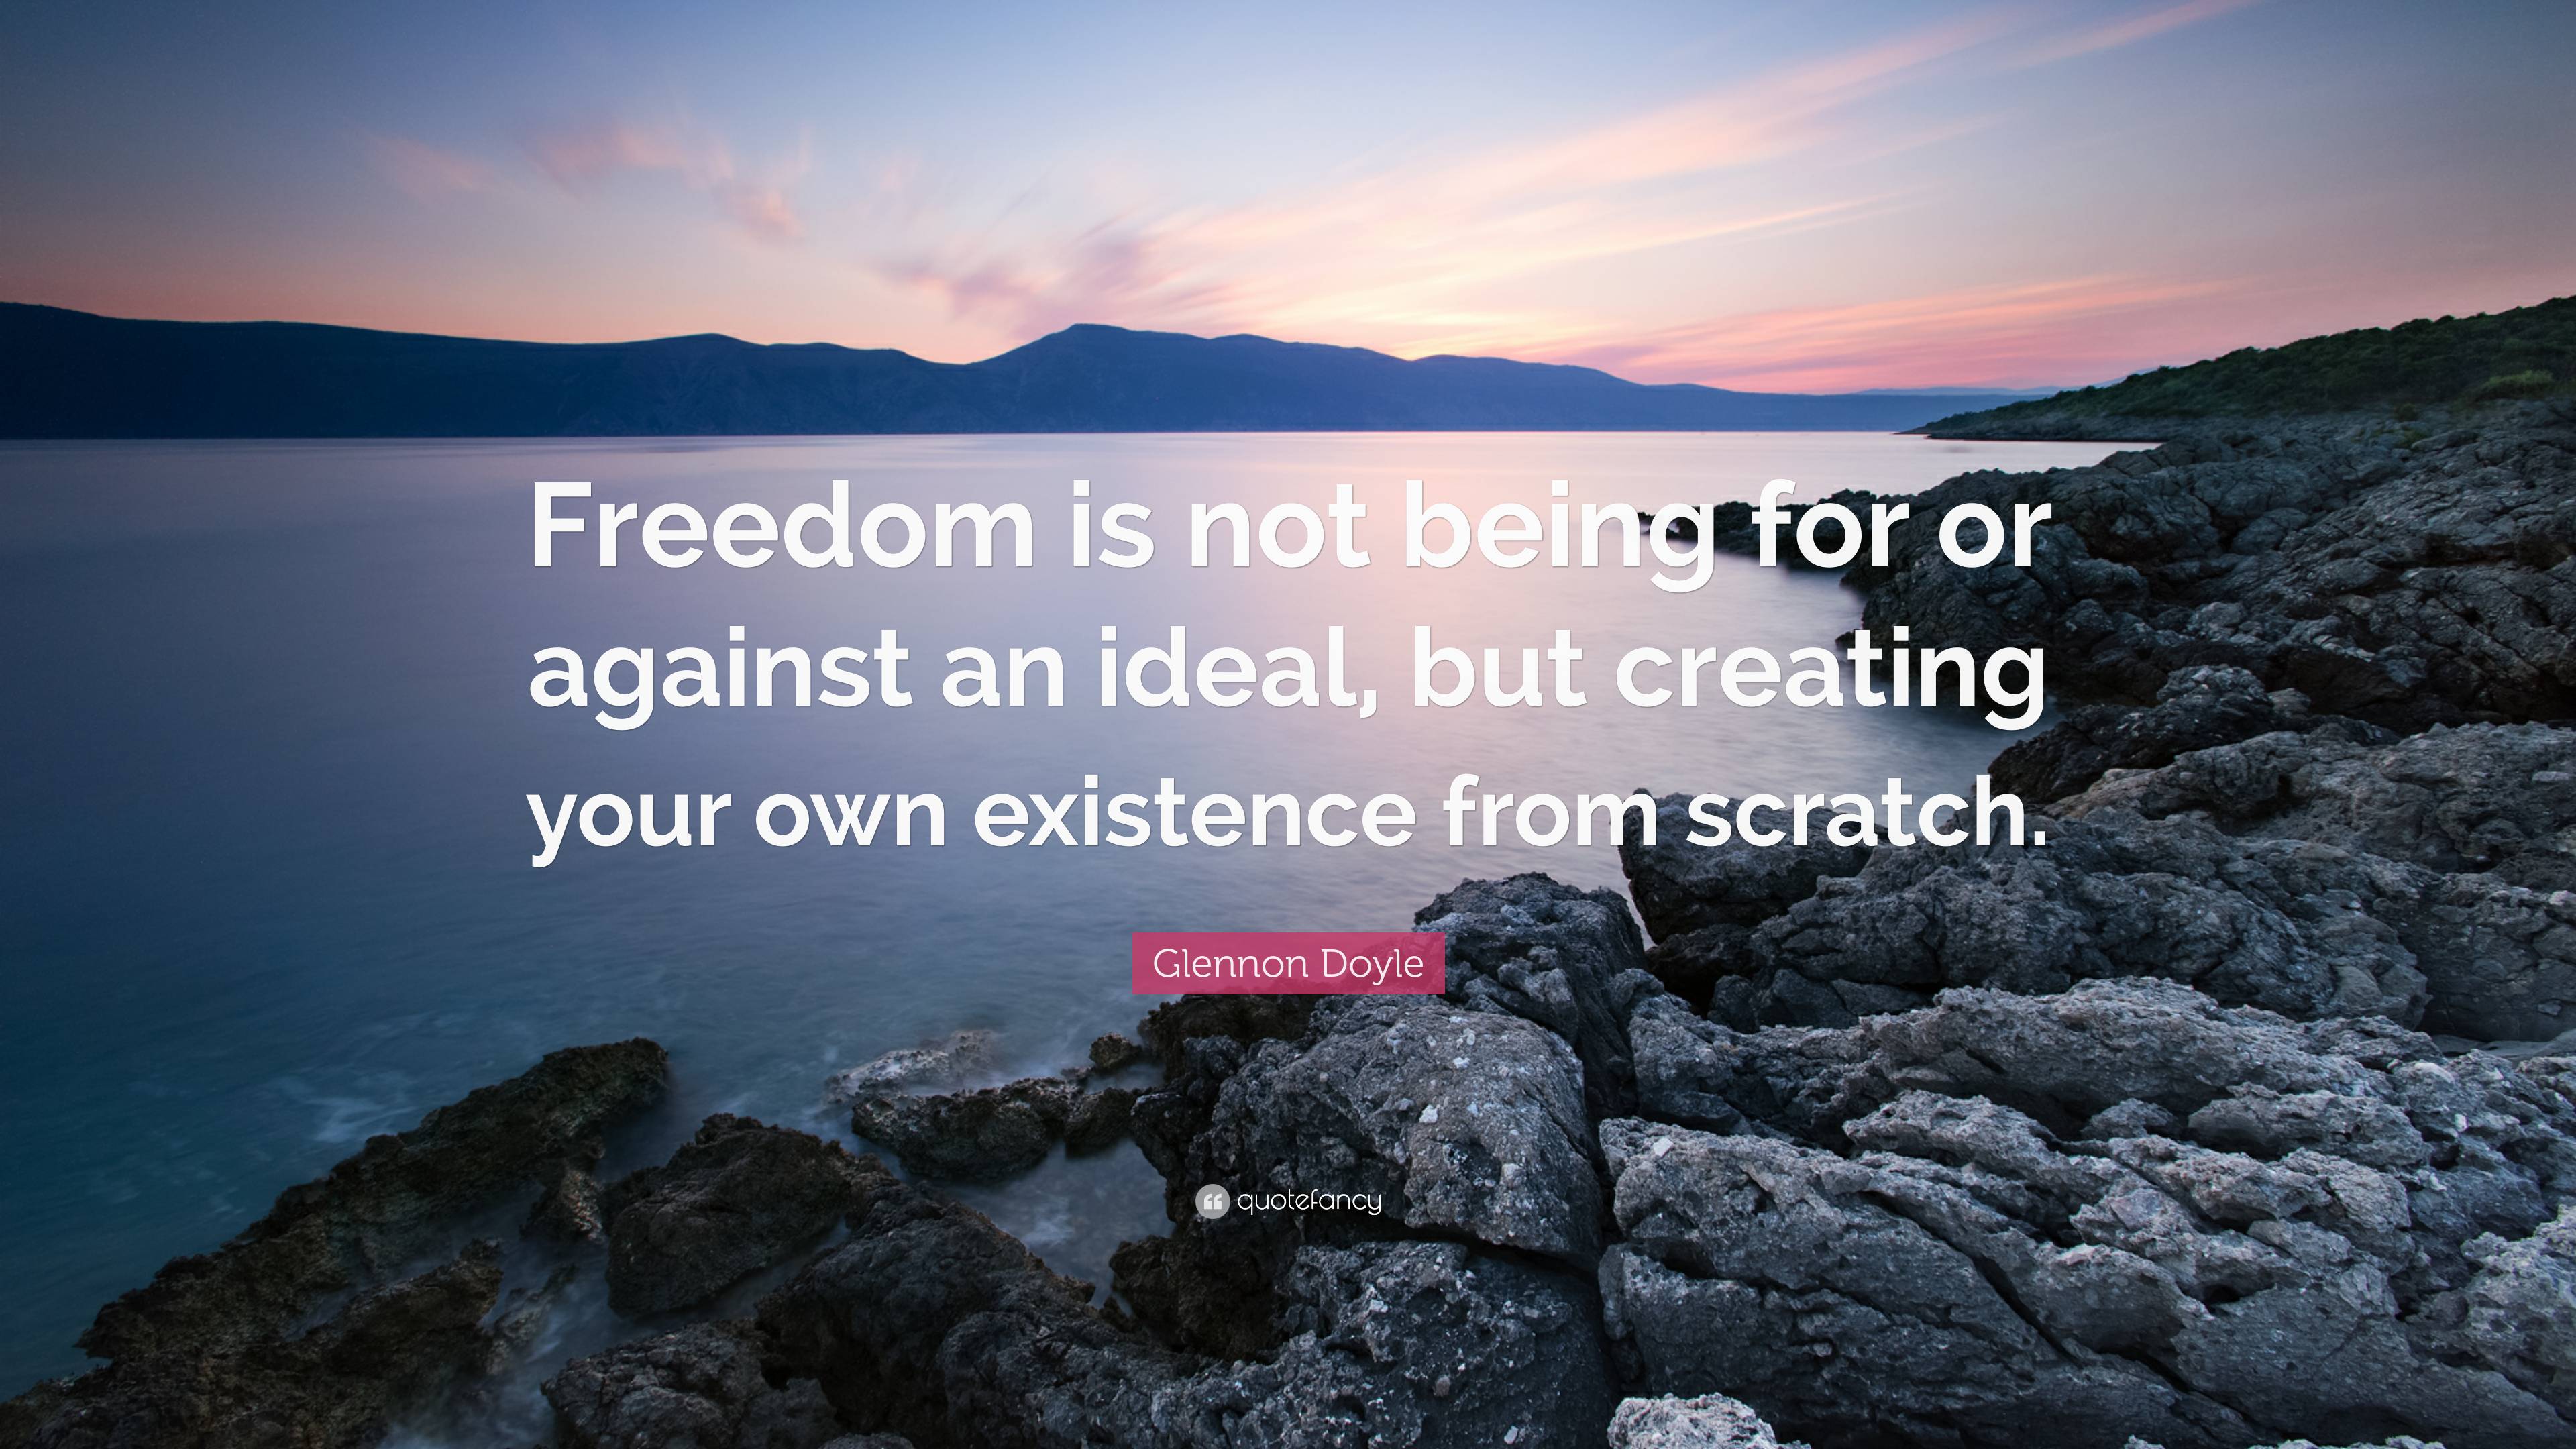 Glennon Doyle Quote: “Freedom is not being for or against an ideal